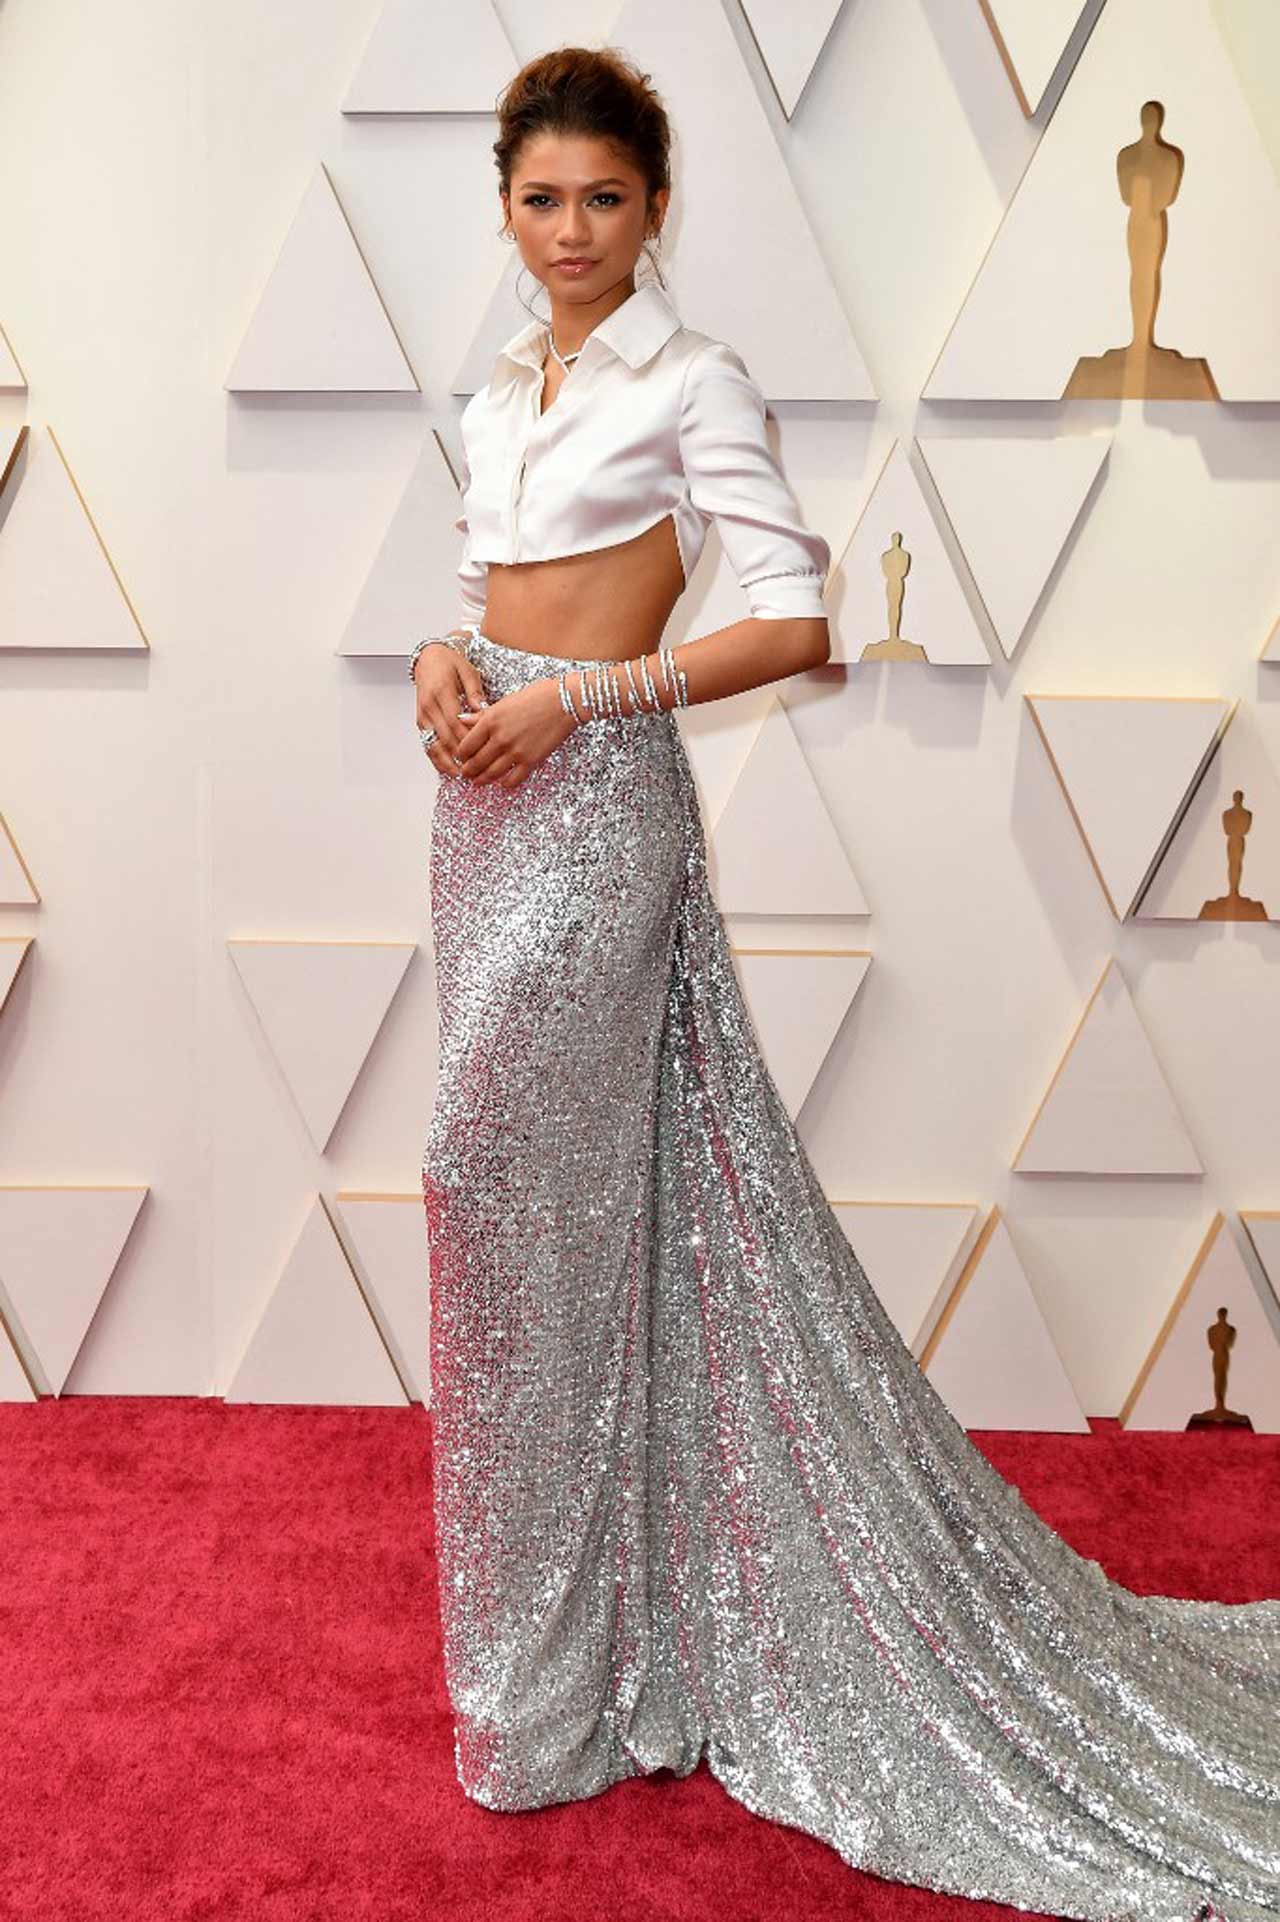 Zendaya, who continues to be the star of every red carpet she graces, arrived wearing a dazzling fully beaded silver skirt with a glossy button-up crop top, bold necklace and messy undone updo.